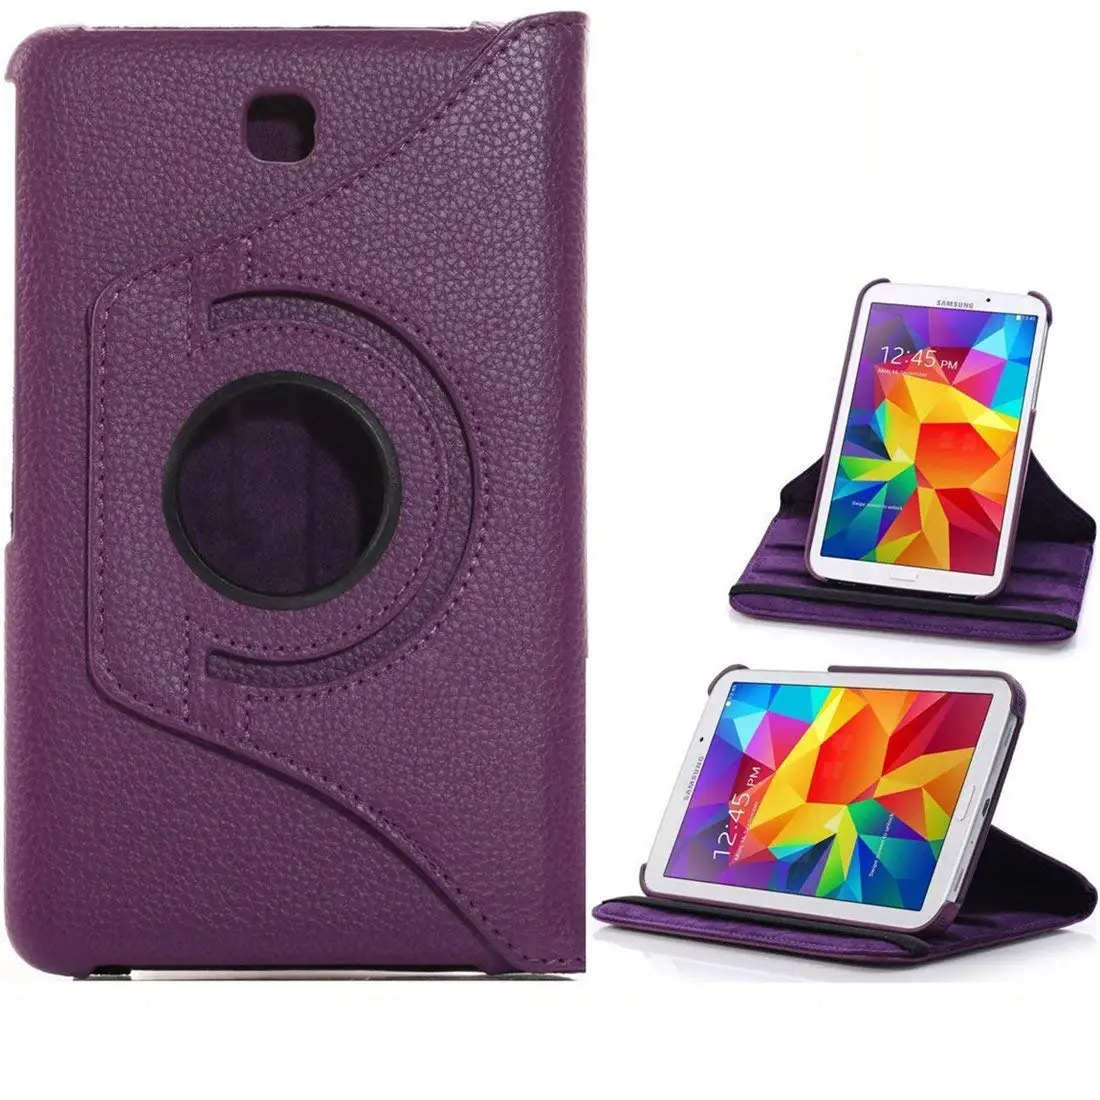 

Cover Case For Samsung Galaxy Tab 4 8 SM-T330 360 Degree Rotating PU Leather Flip Case Tab4 8inch T331 T335 Tablet Screen Glass